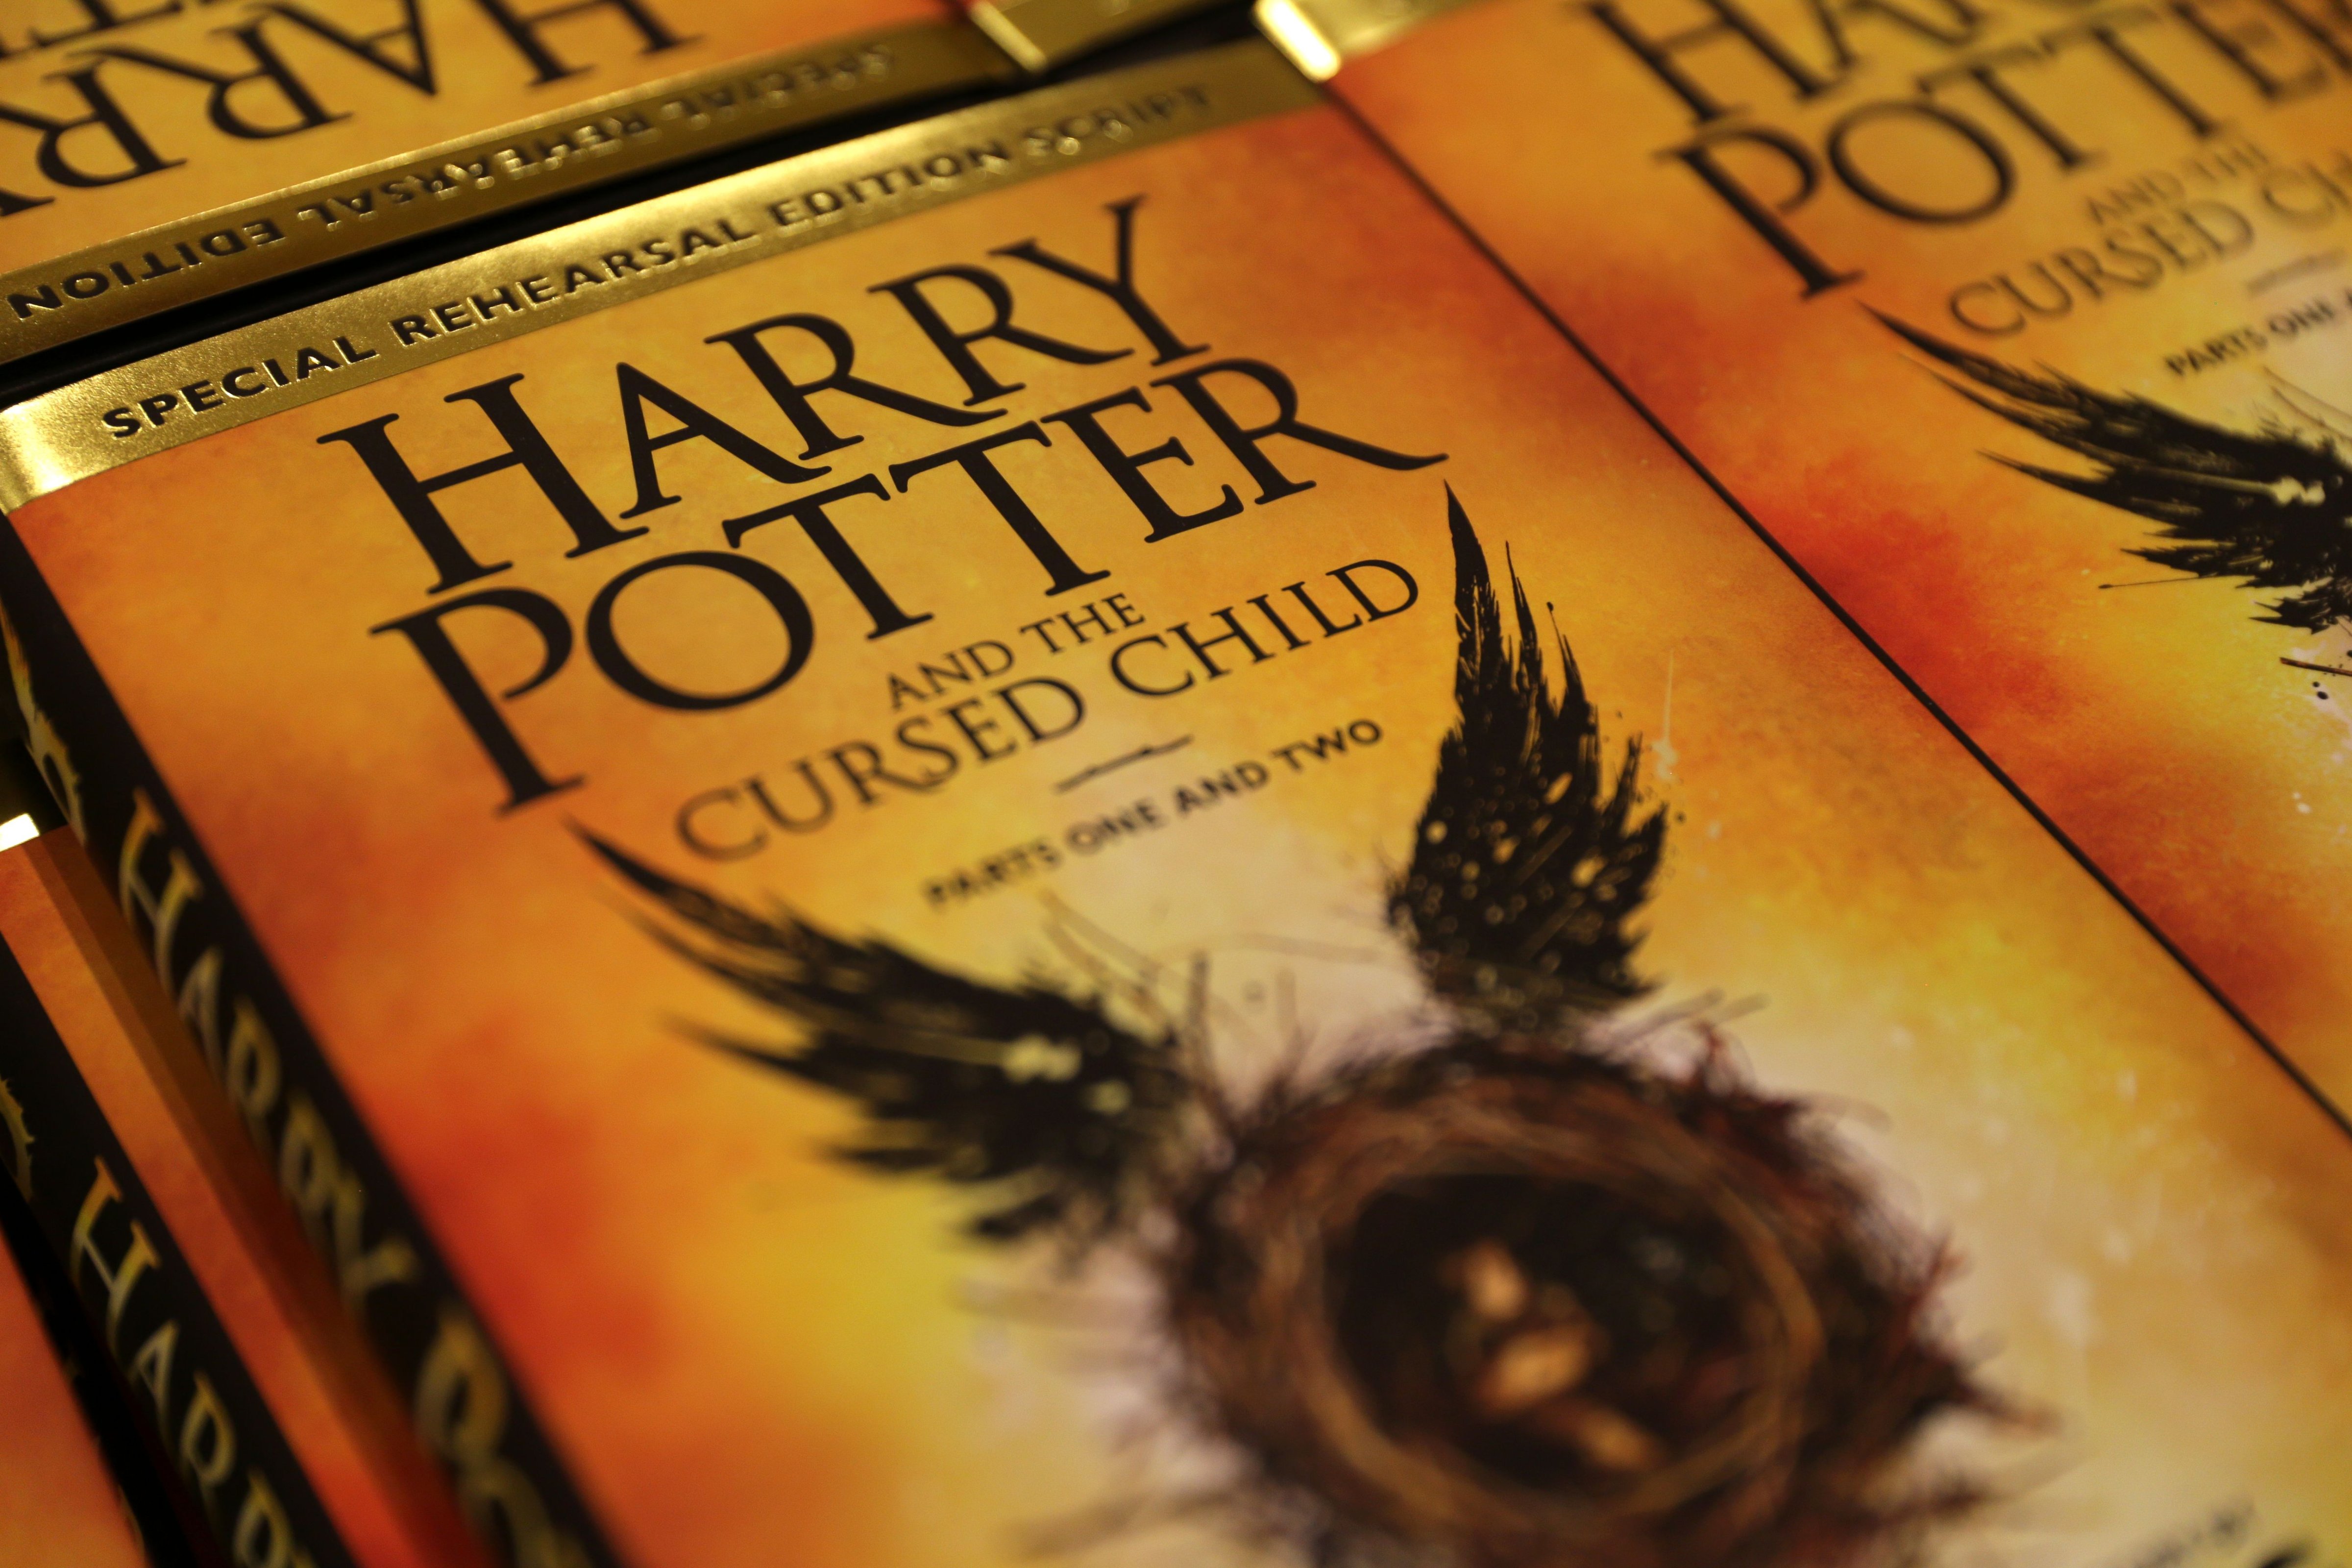 Piles of the new Harry Potter script book "Harry Potter and the Cursed Child Parts One &amp; Two" are pictured inside Waterstones bookshop on Piccadilly in central London early in the morning of July 31, 2016, during the midnight party celebrating the publication of "Harry Potter and the Cursed Child Parts One &amp; Two" script book. (DANIEL LEAL-OLIVAS—AFP / Getty Images)